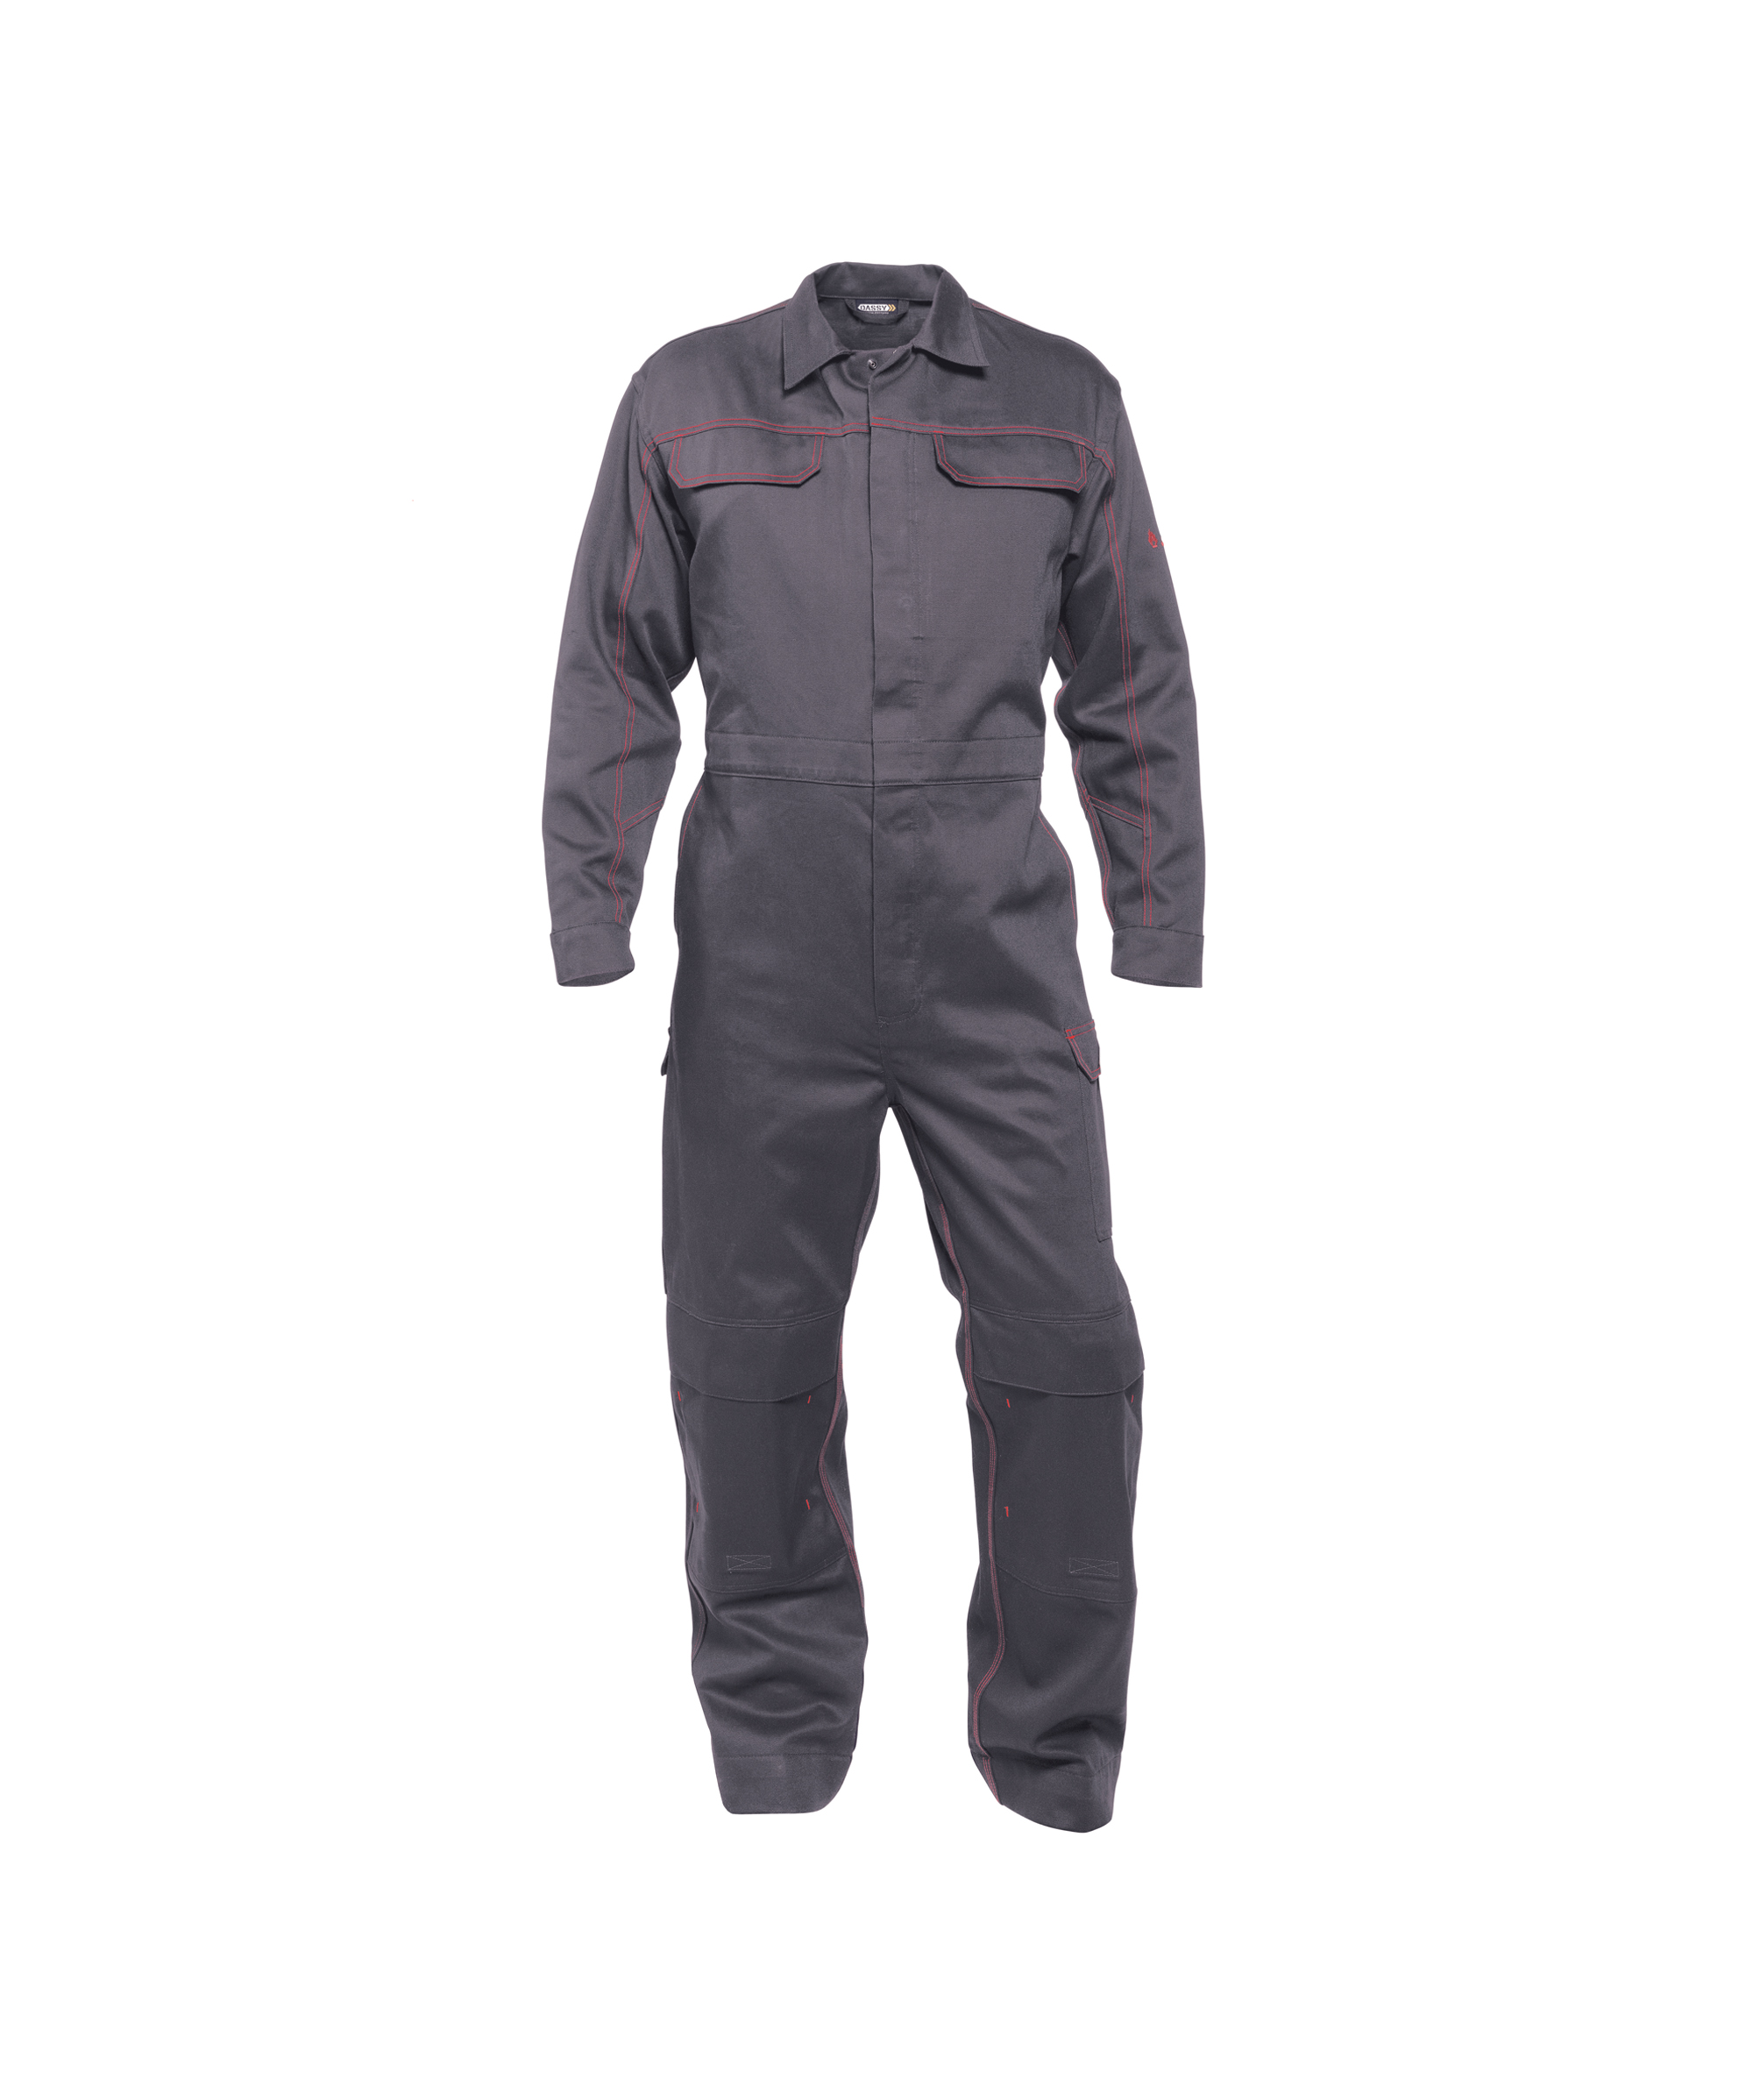 toronto_flame-retardant-overall-with-knee-pockets_cement-grey_front.jpg